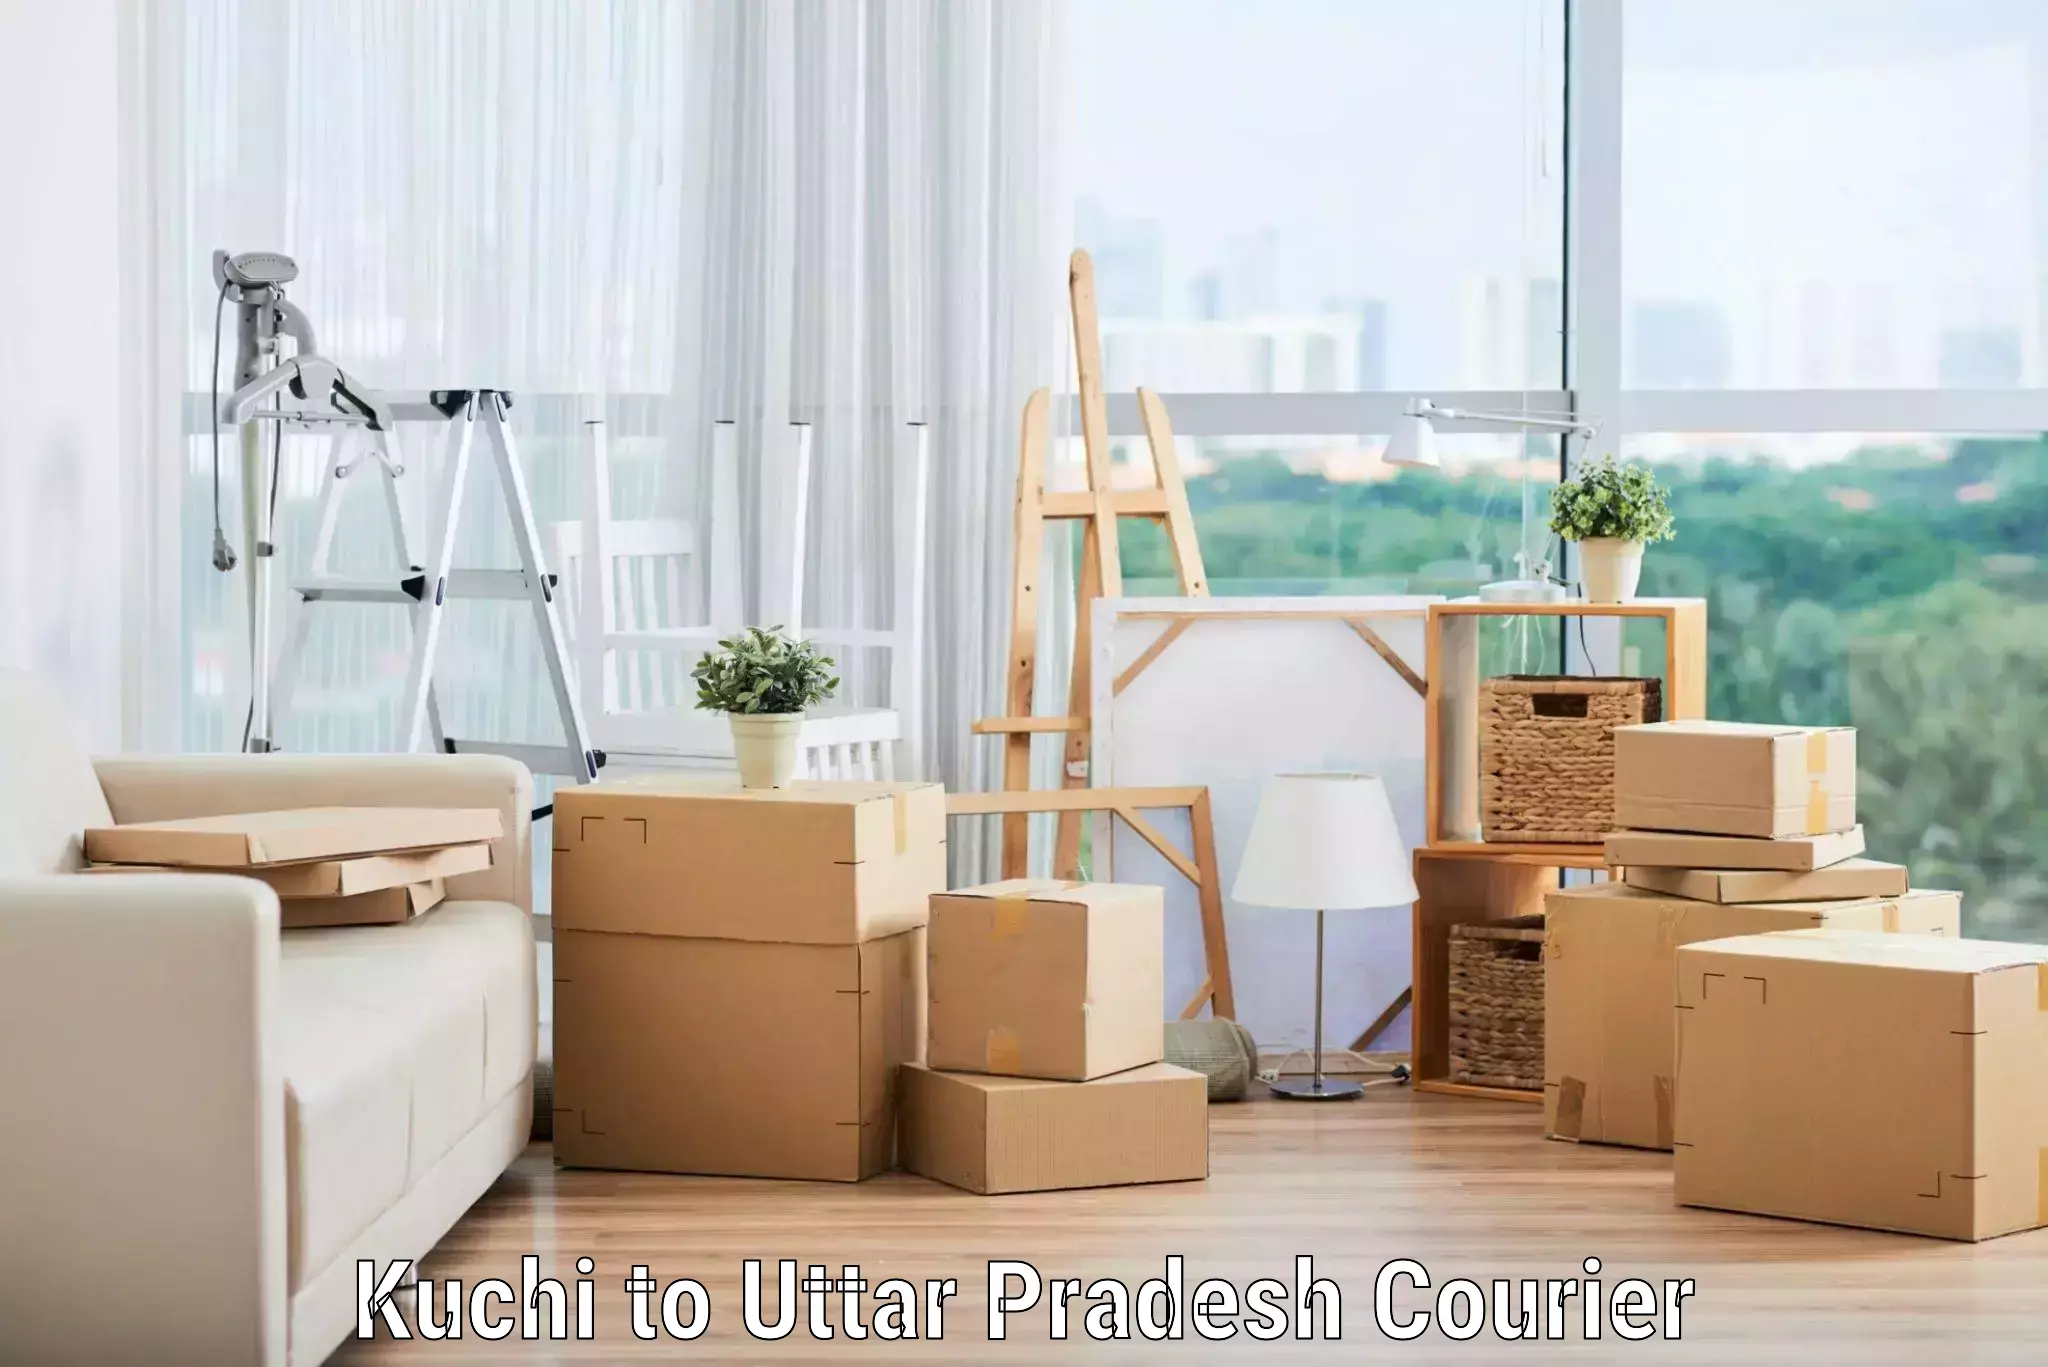 Reliable moving assistance Kuchi to Balrampur